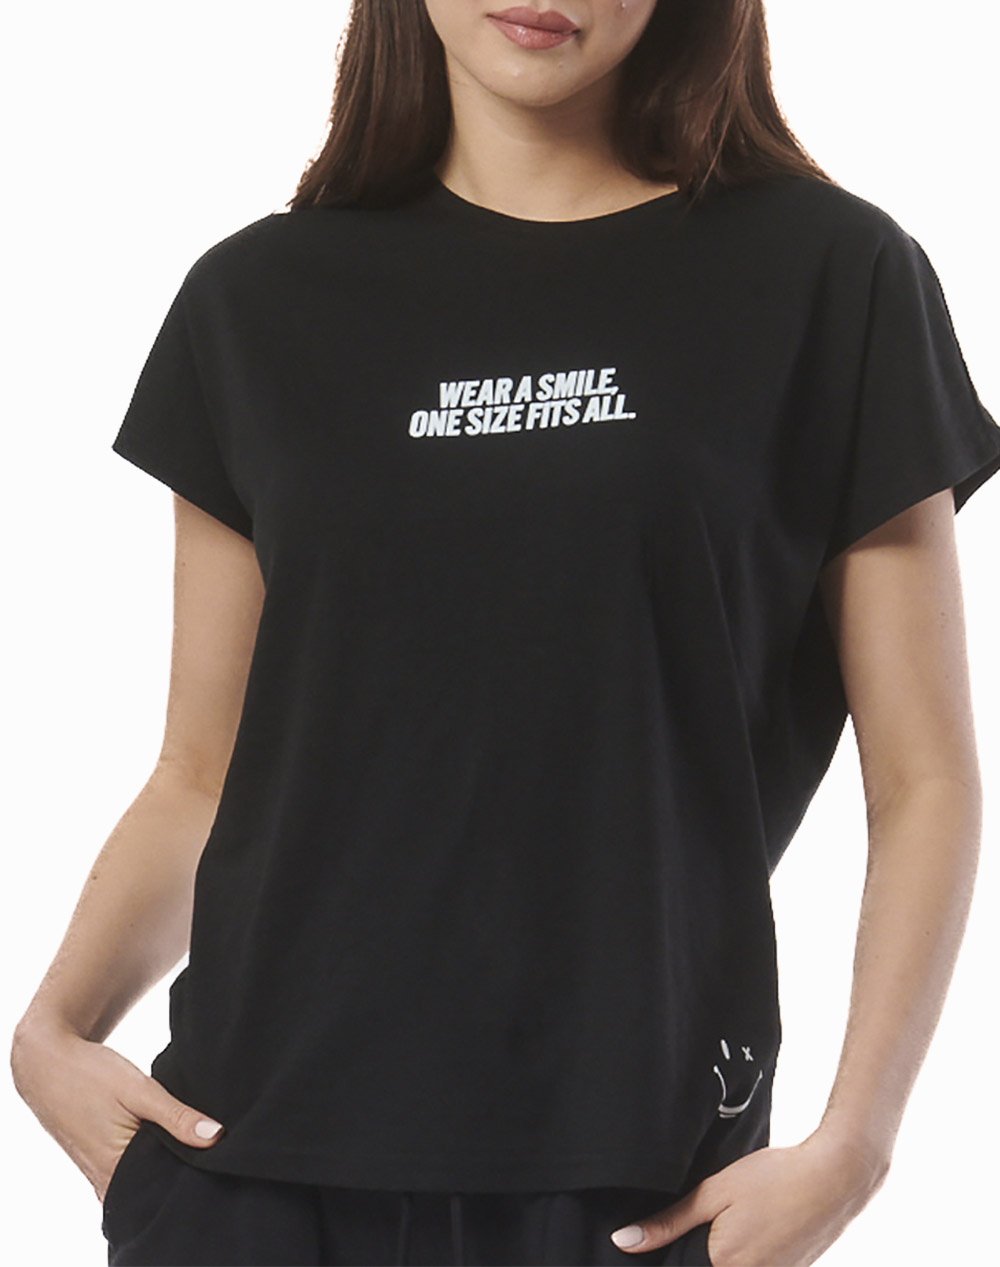 BODY ACTION WOMEN”S RELAXED FIT T-SHIRT 051421-01-BLACK Black 3810PBODY3400031_2813